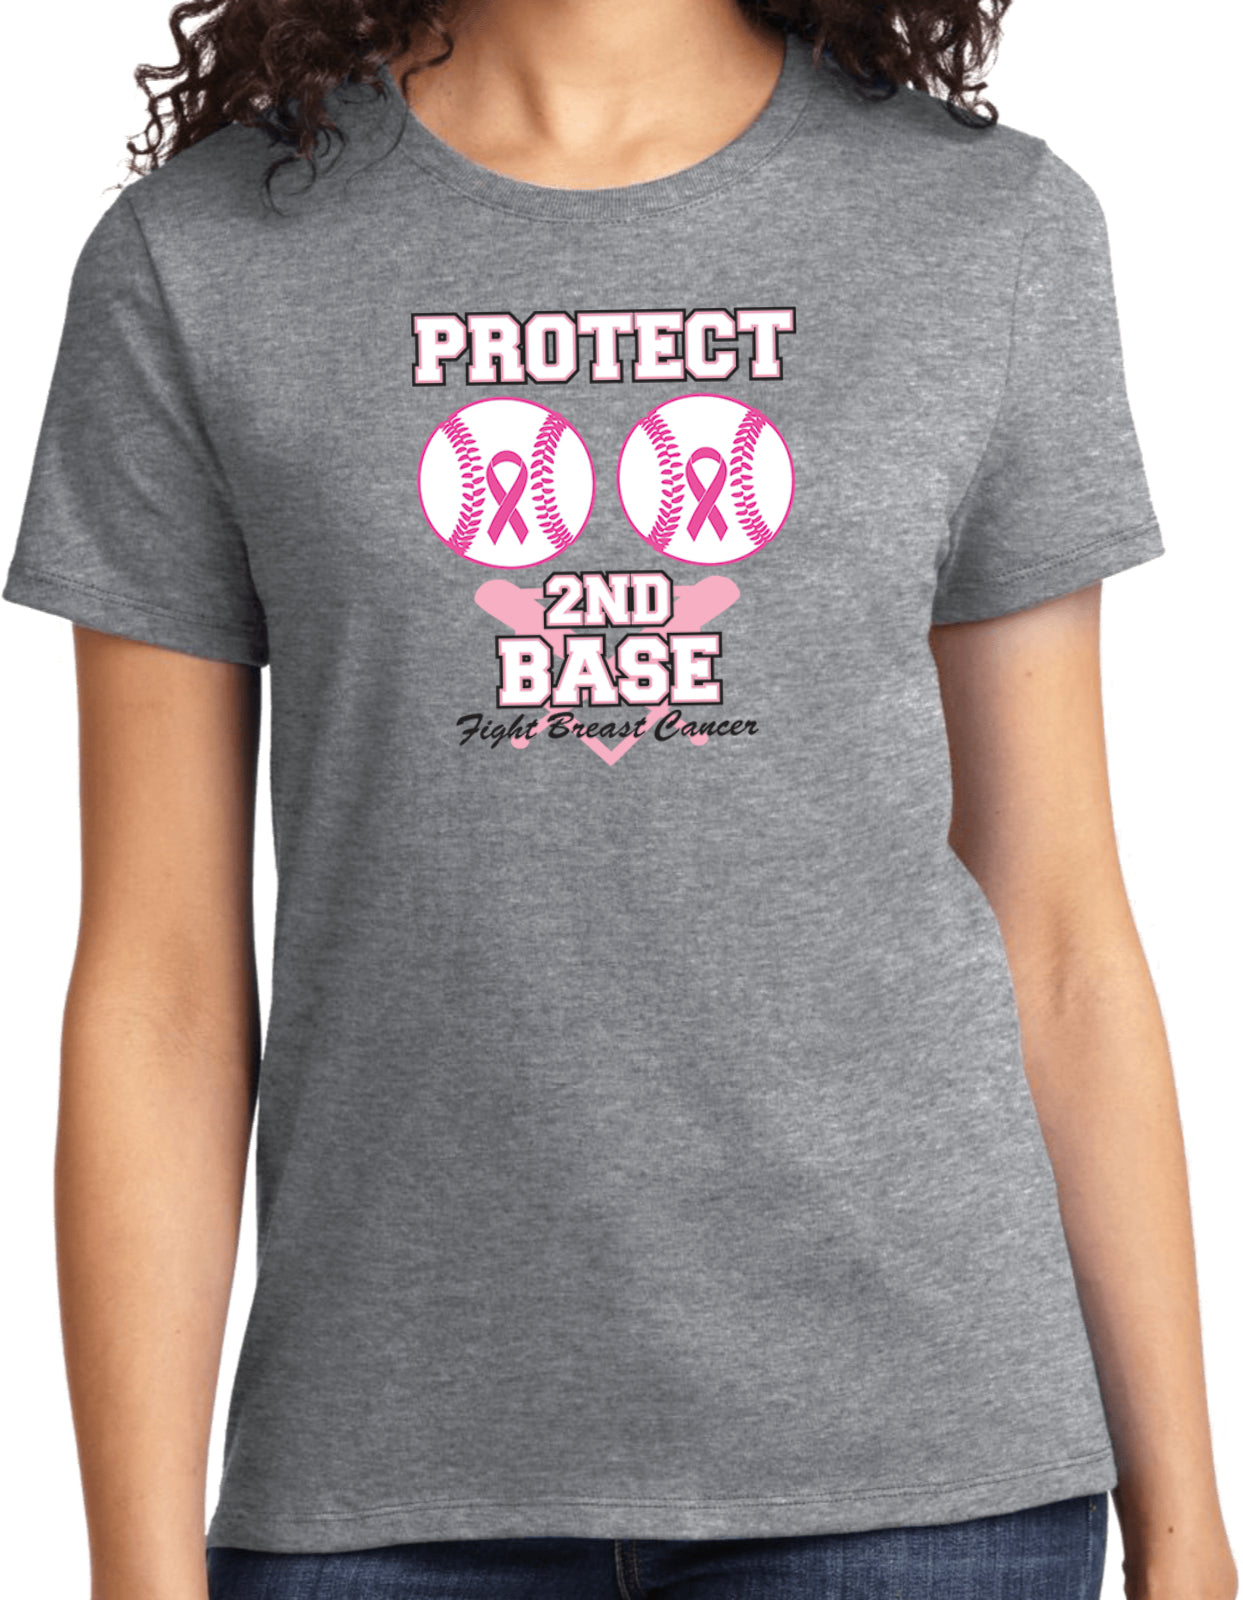 Ladies Breast Cancer T-shirt Protect Second Base Tee